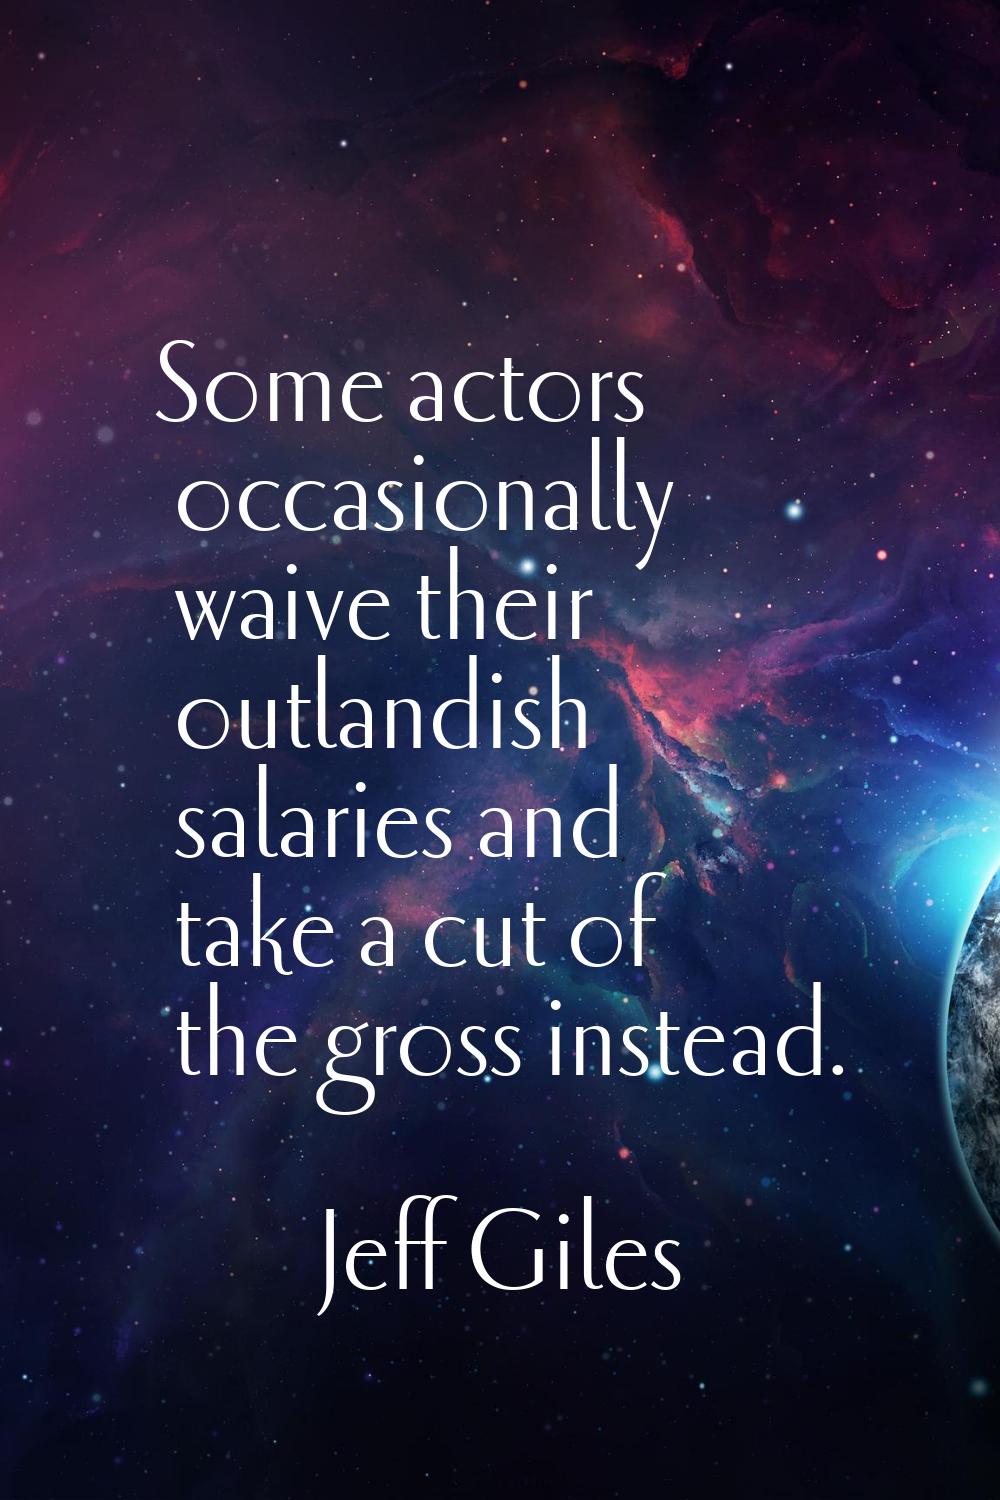 Some actors occasionally waive their outlandish salaries and take a cut of the gross instead.